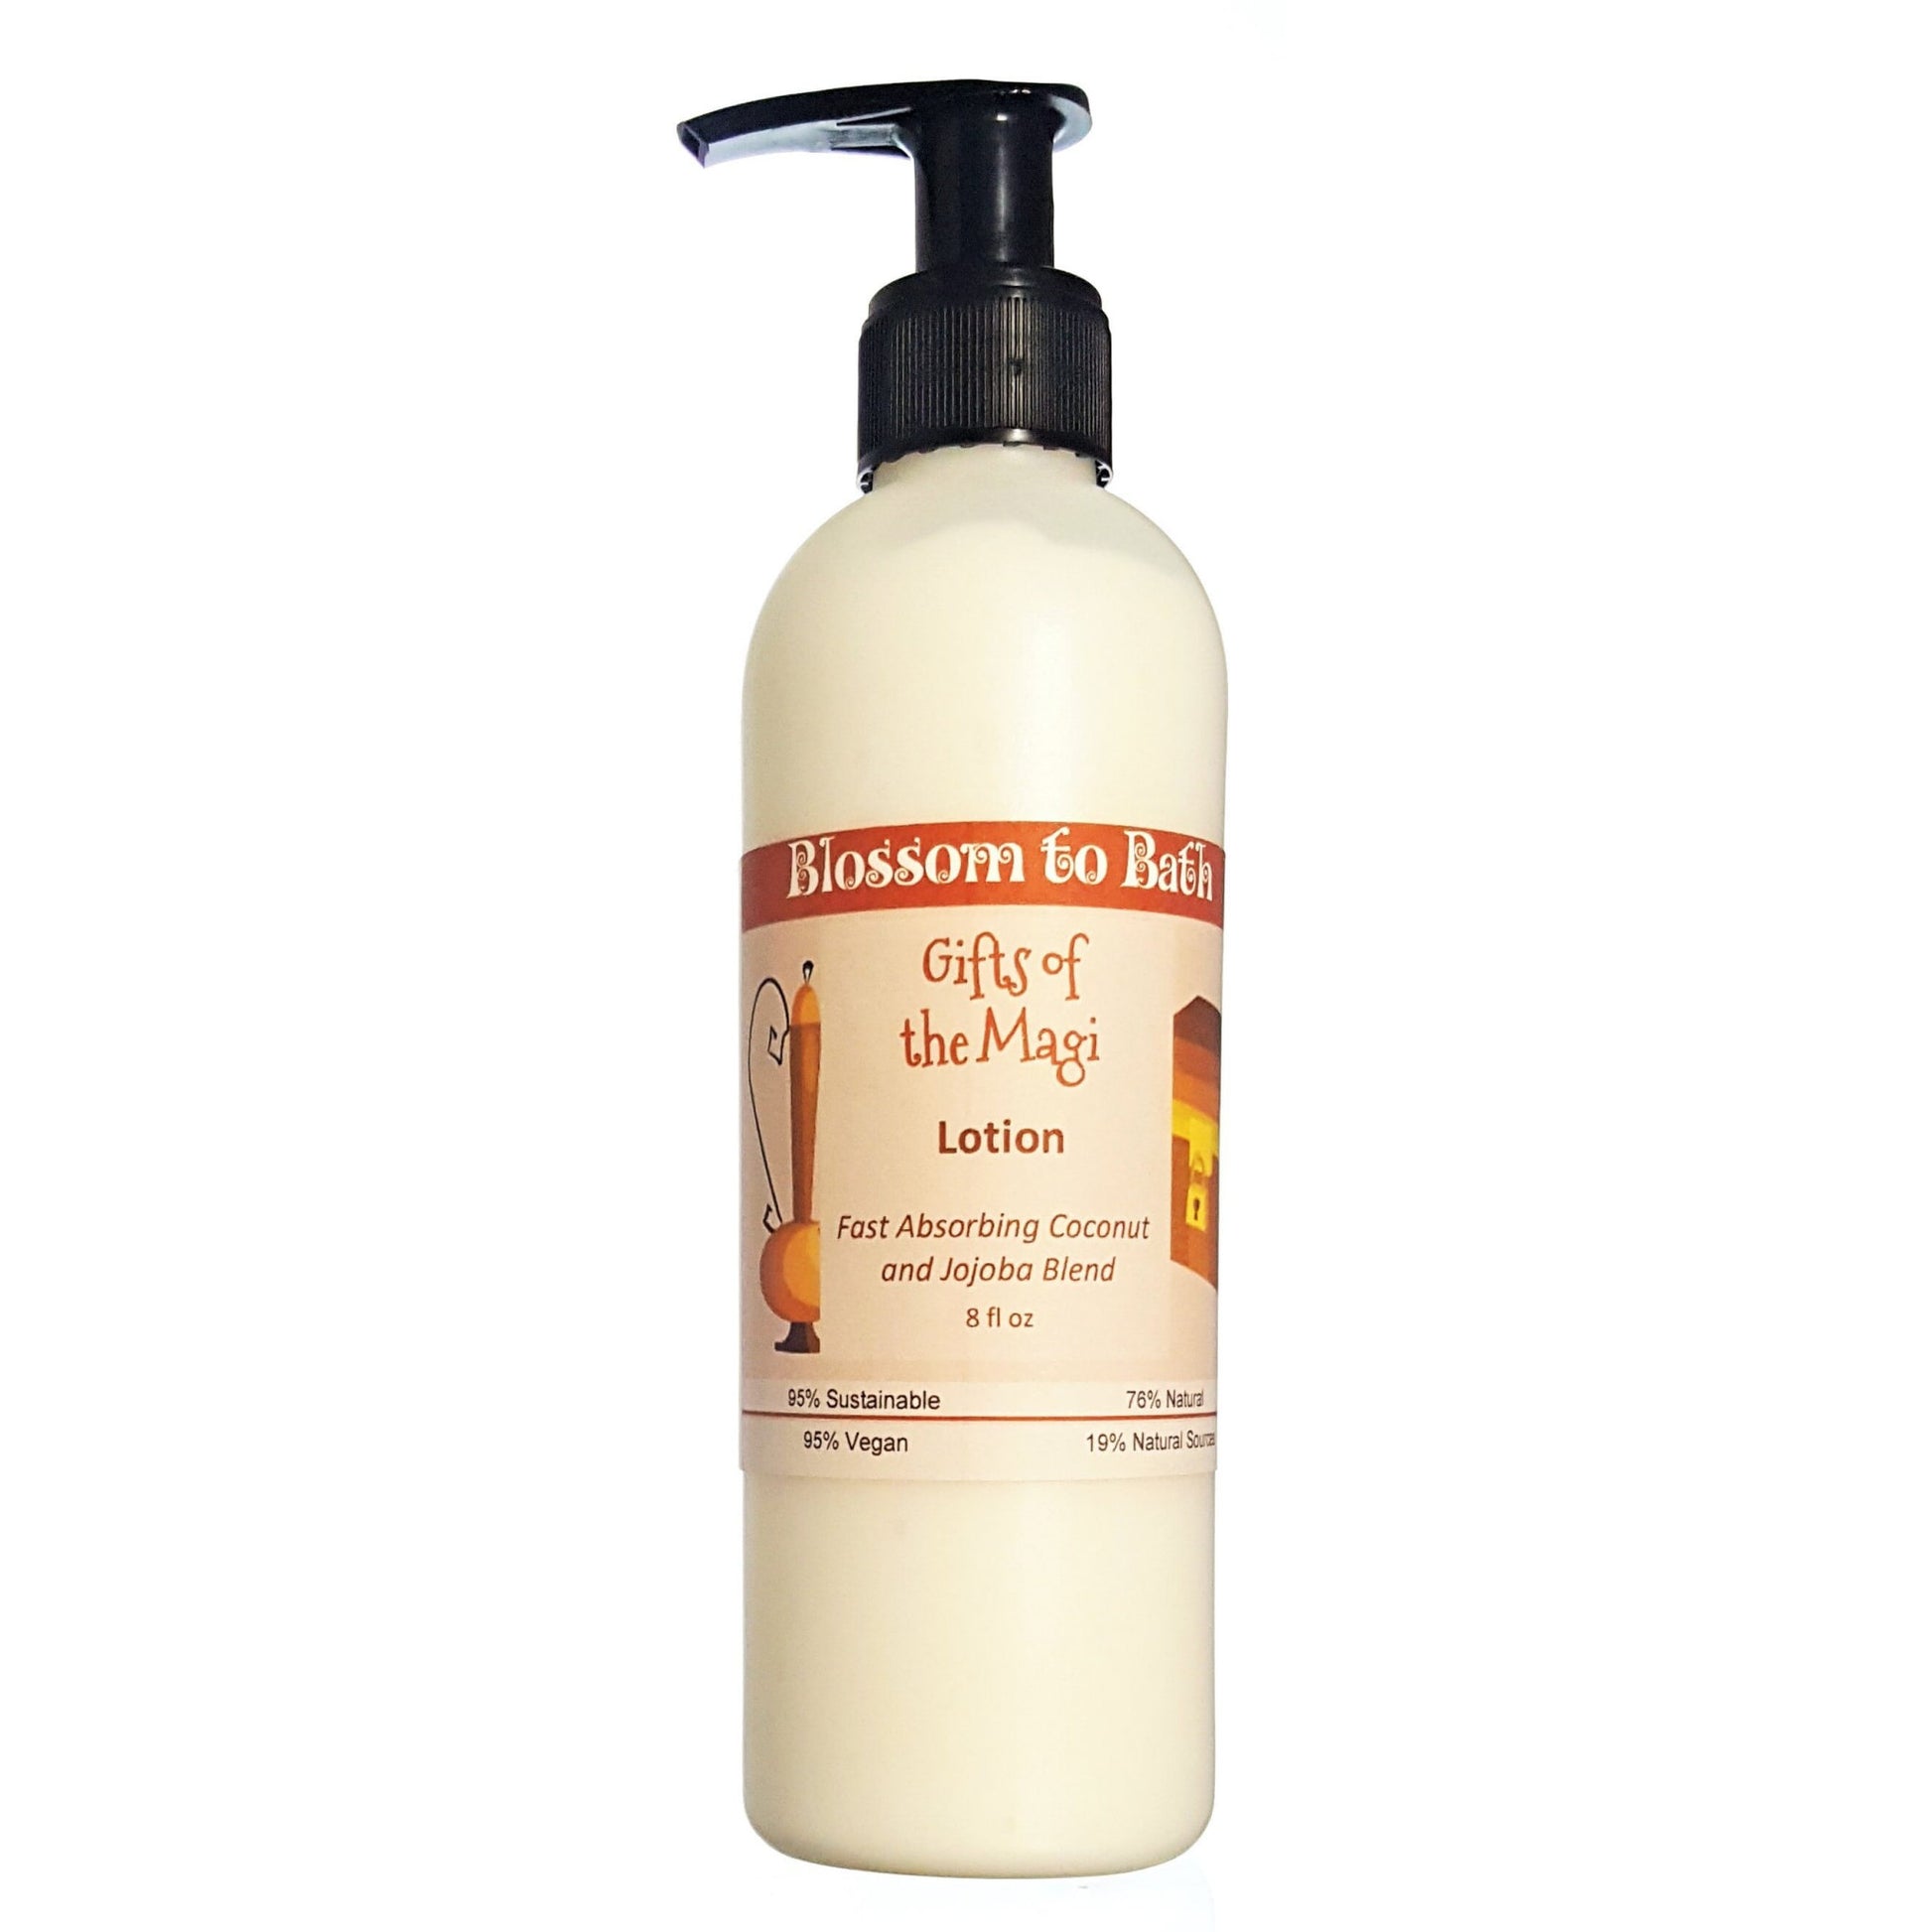 Buy Blossom to Bath Gifts of the Magi Lotion from Flowersong Soap Studio.  Daily moisture  that soaks in quickly made with organic oils and butters that soften and smooth the skin  Celebrate the soulful side of the holiday spirit with warm spices and incense.